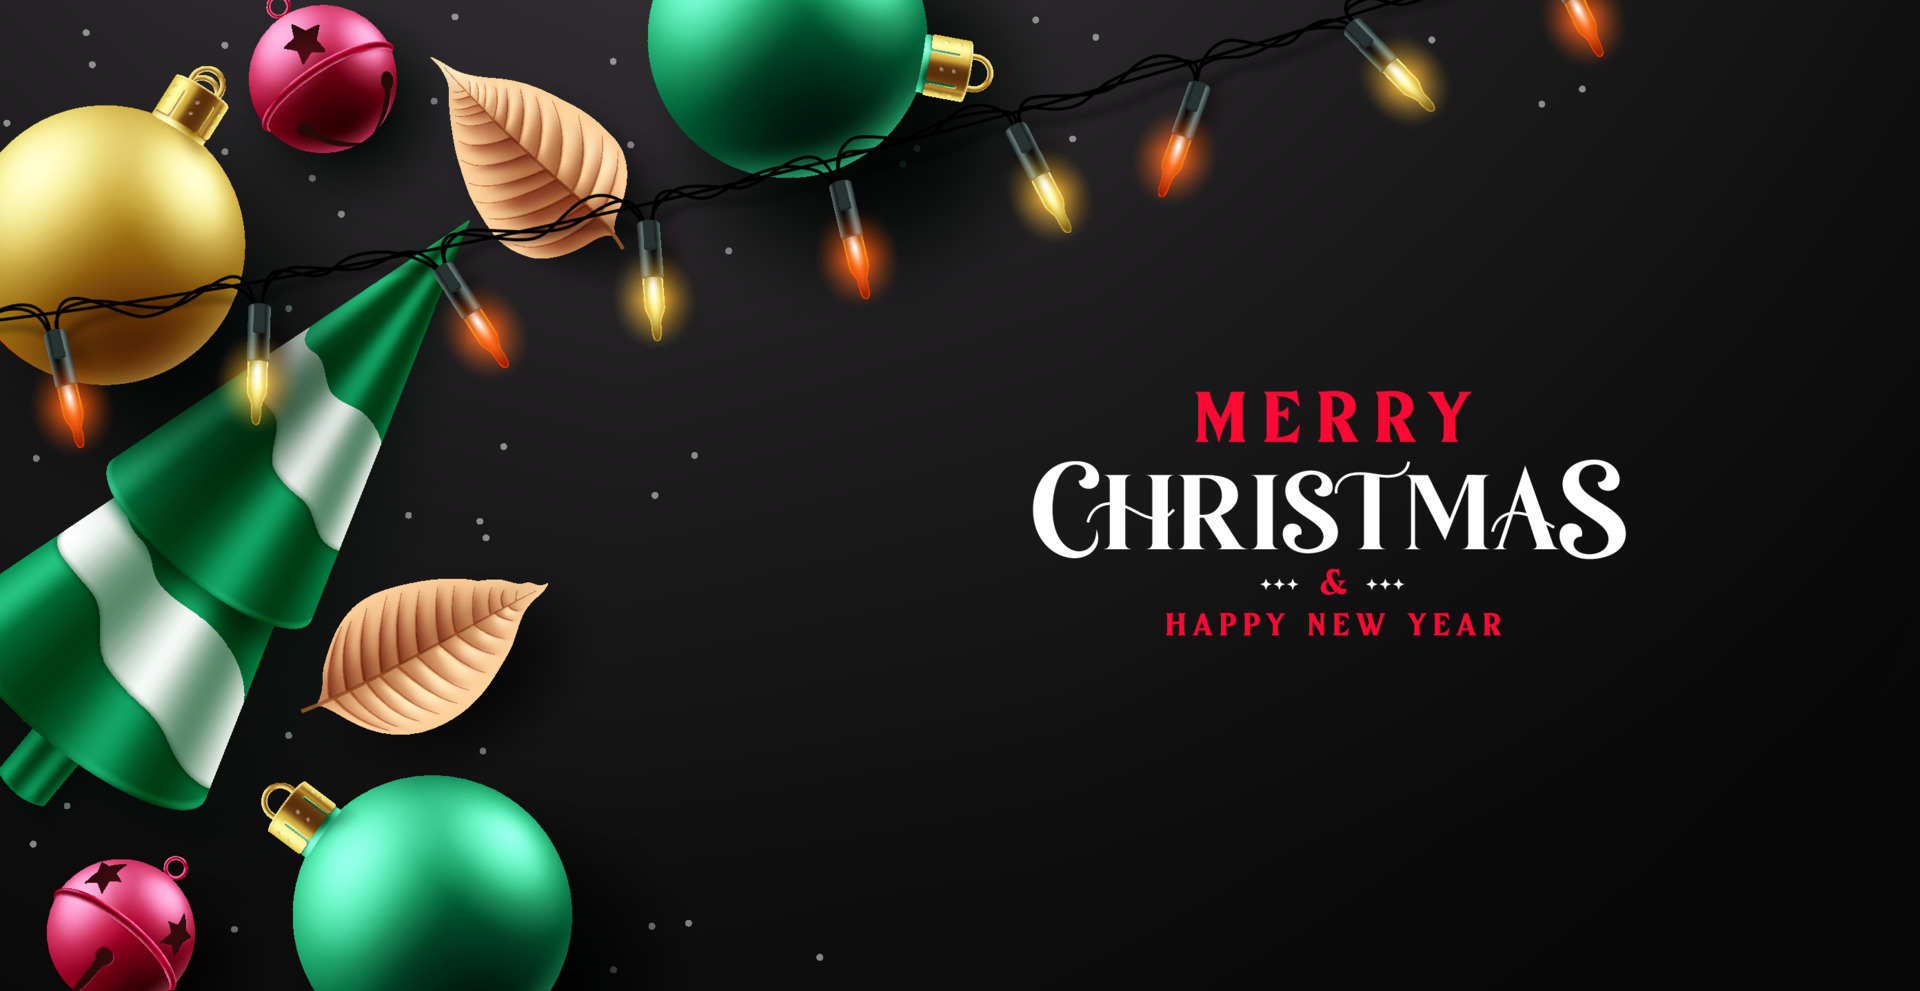 Christmas greeting vector background design. Merry christmas ...